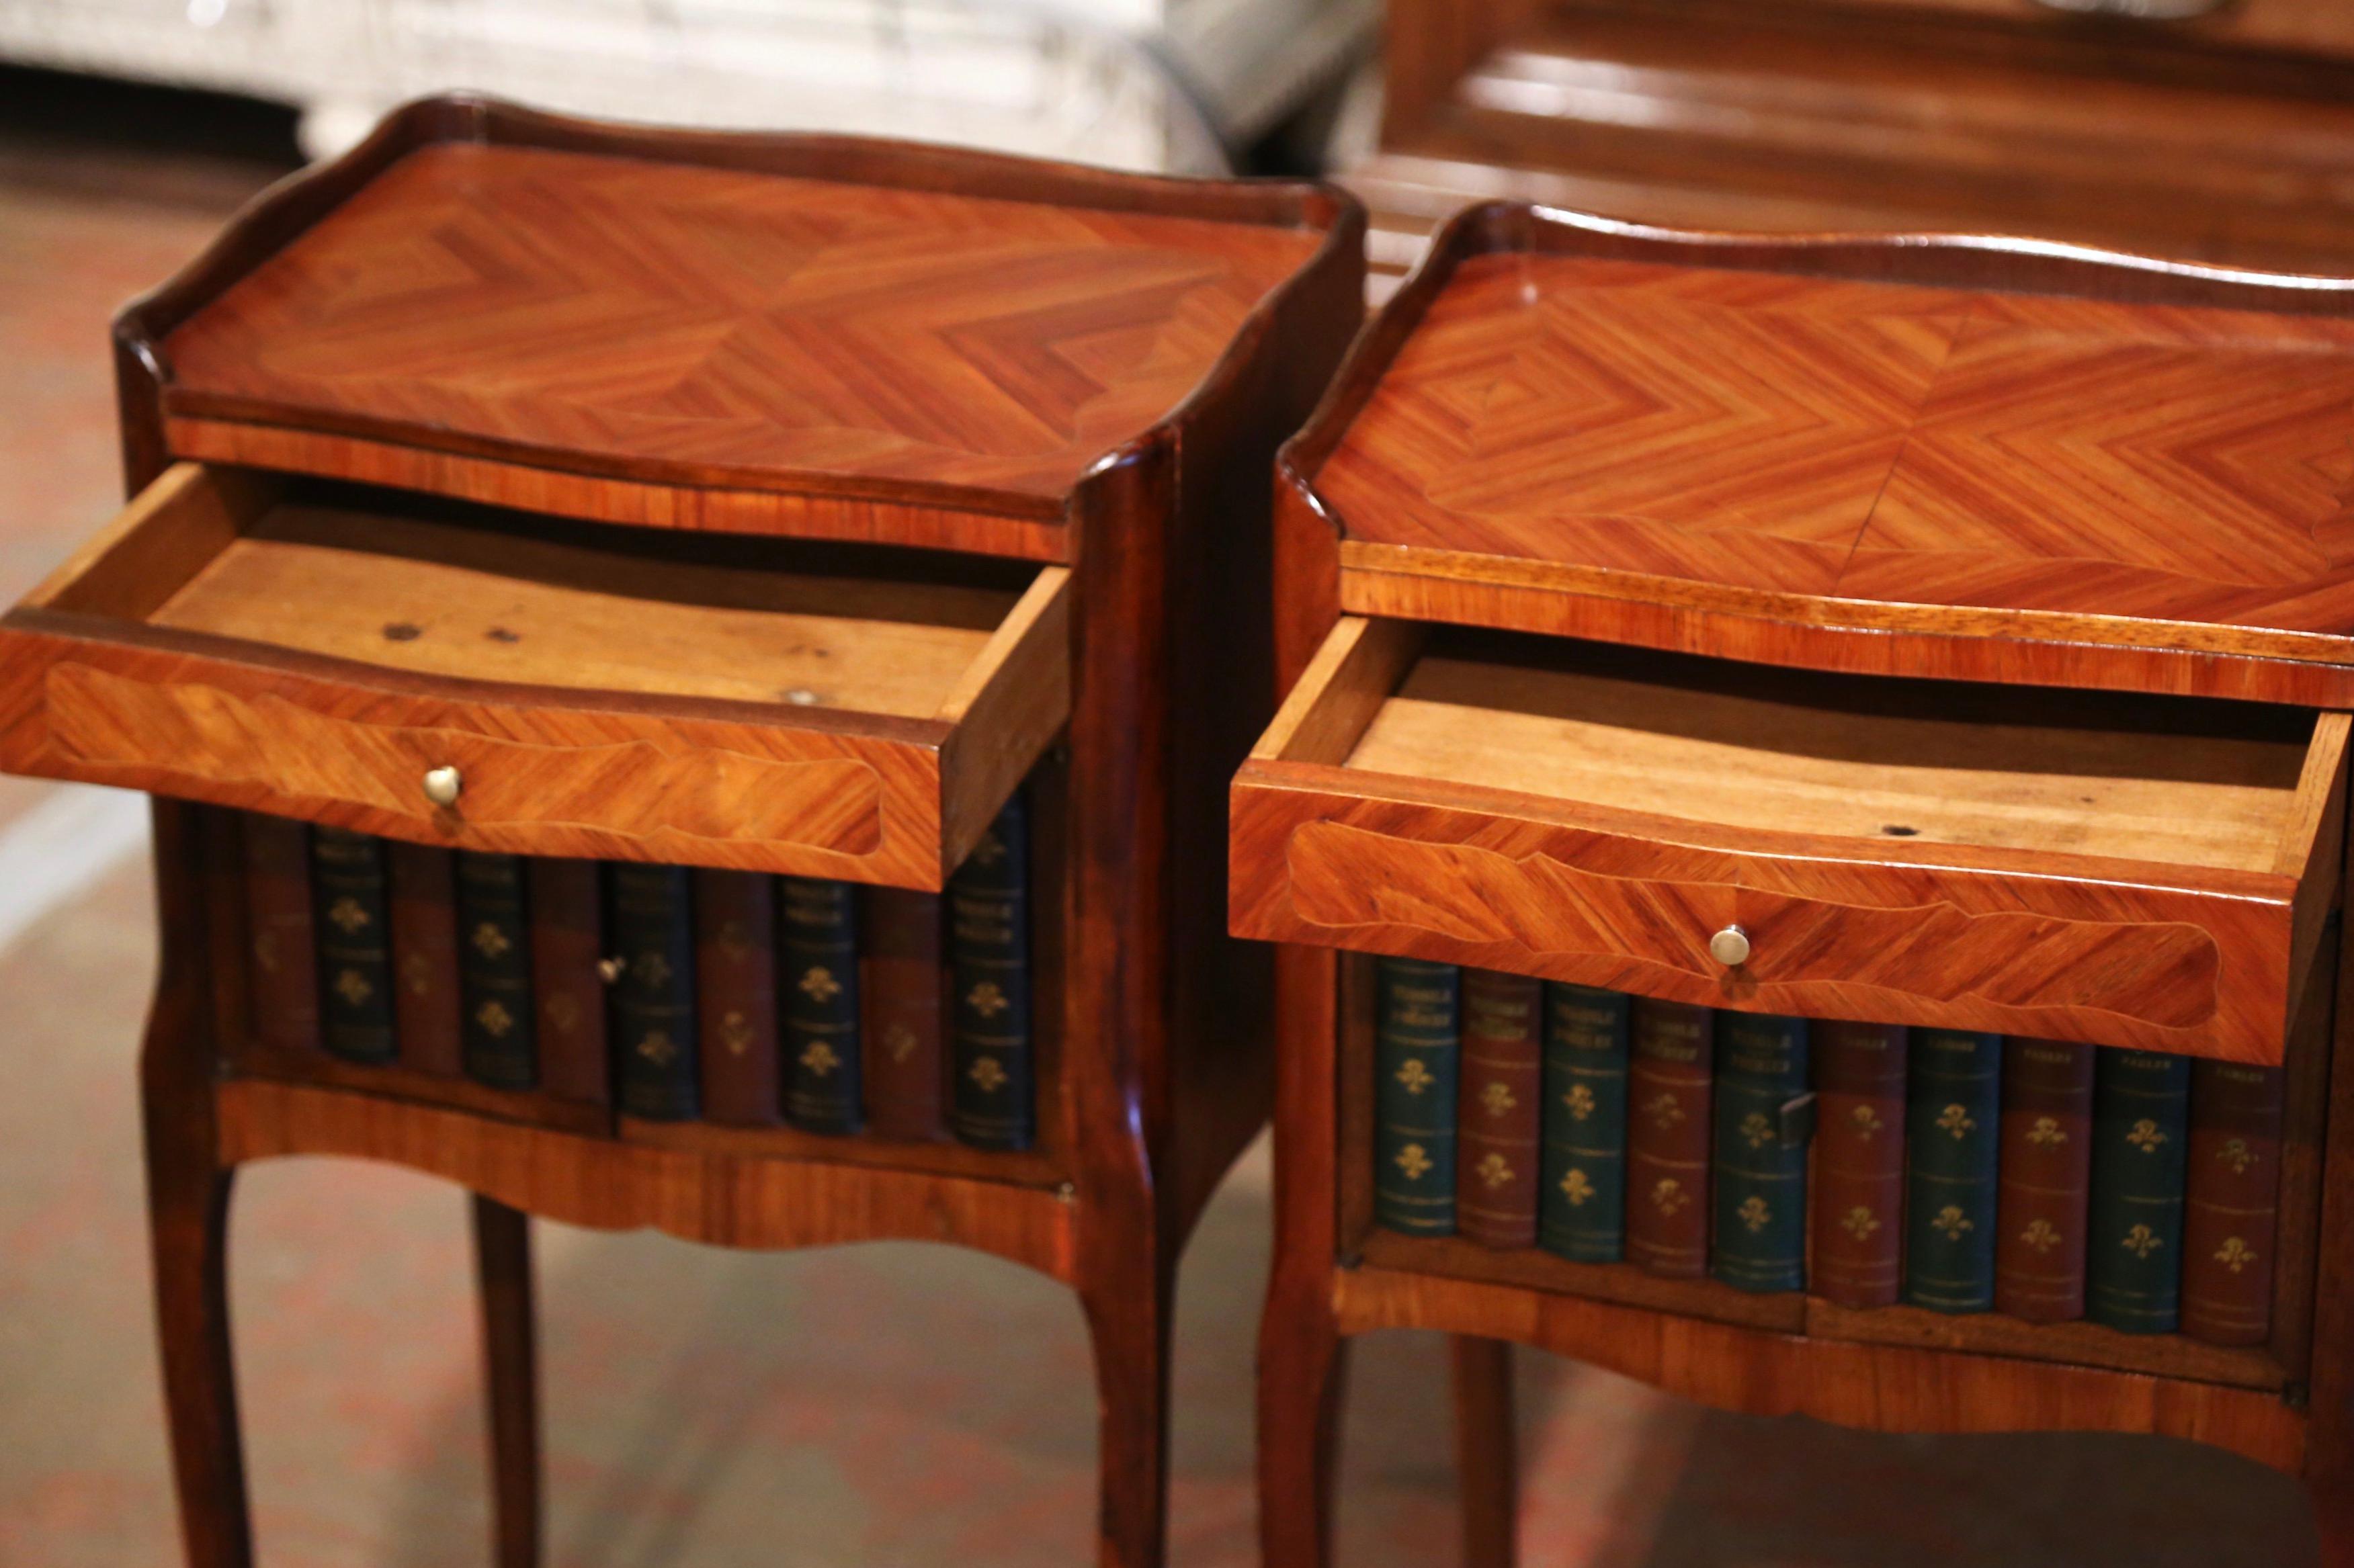 Pair of 19th Century French Walnut Nightstands with Leather Book Spine Doors For Sale 7